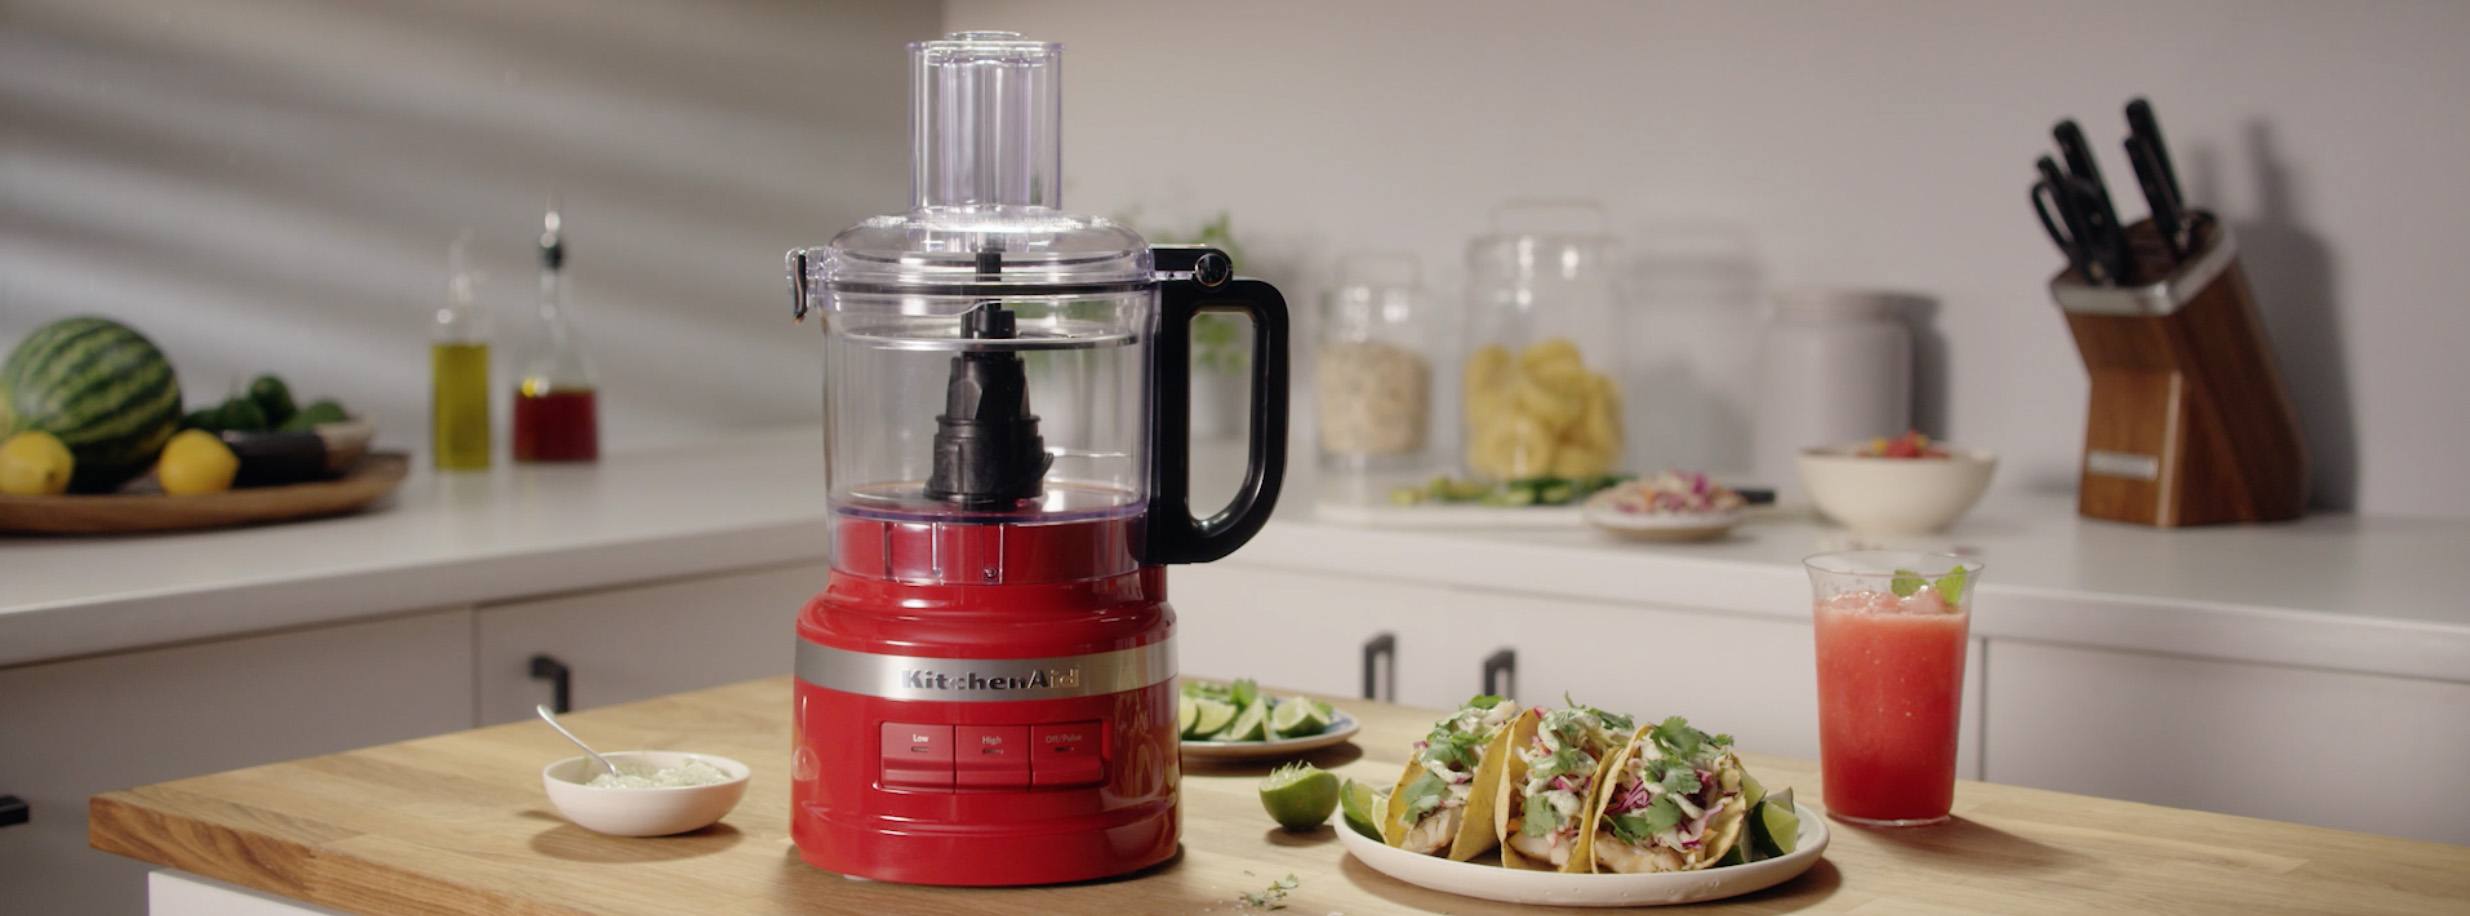 Introducing the KitchenAid Vegetable Sheet Cutter Attachment 